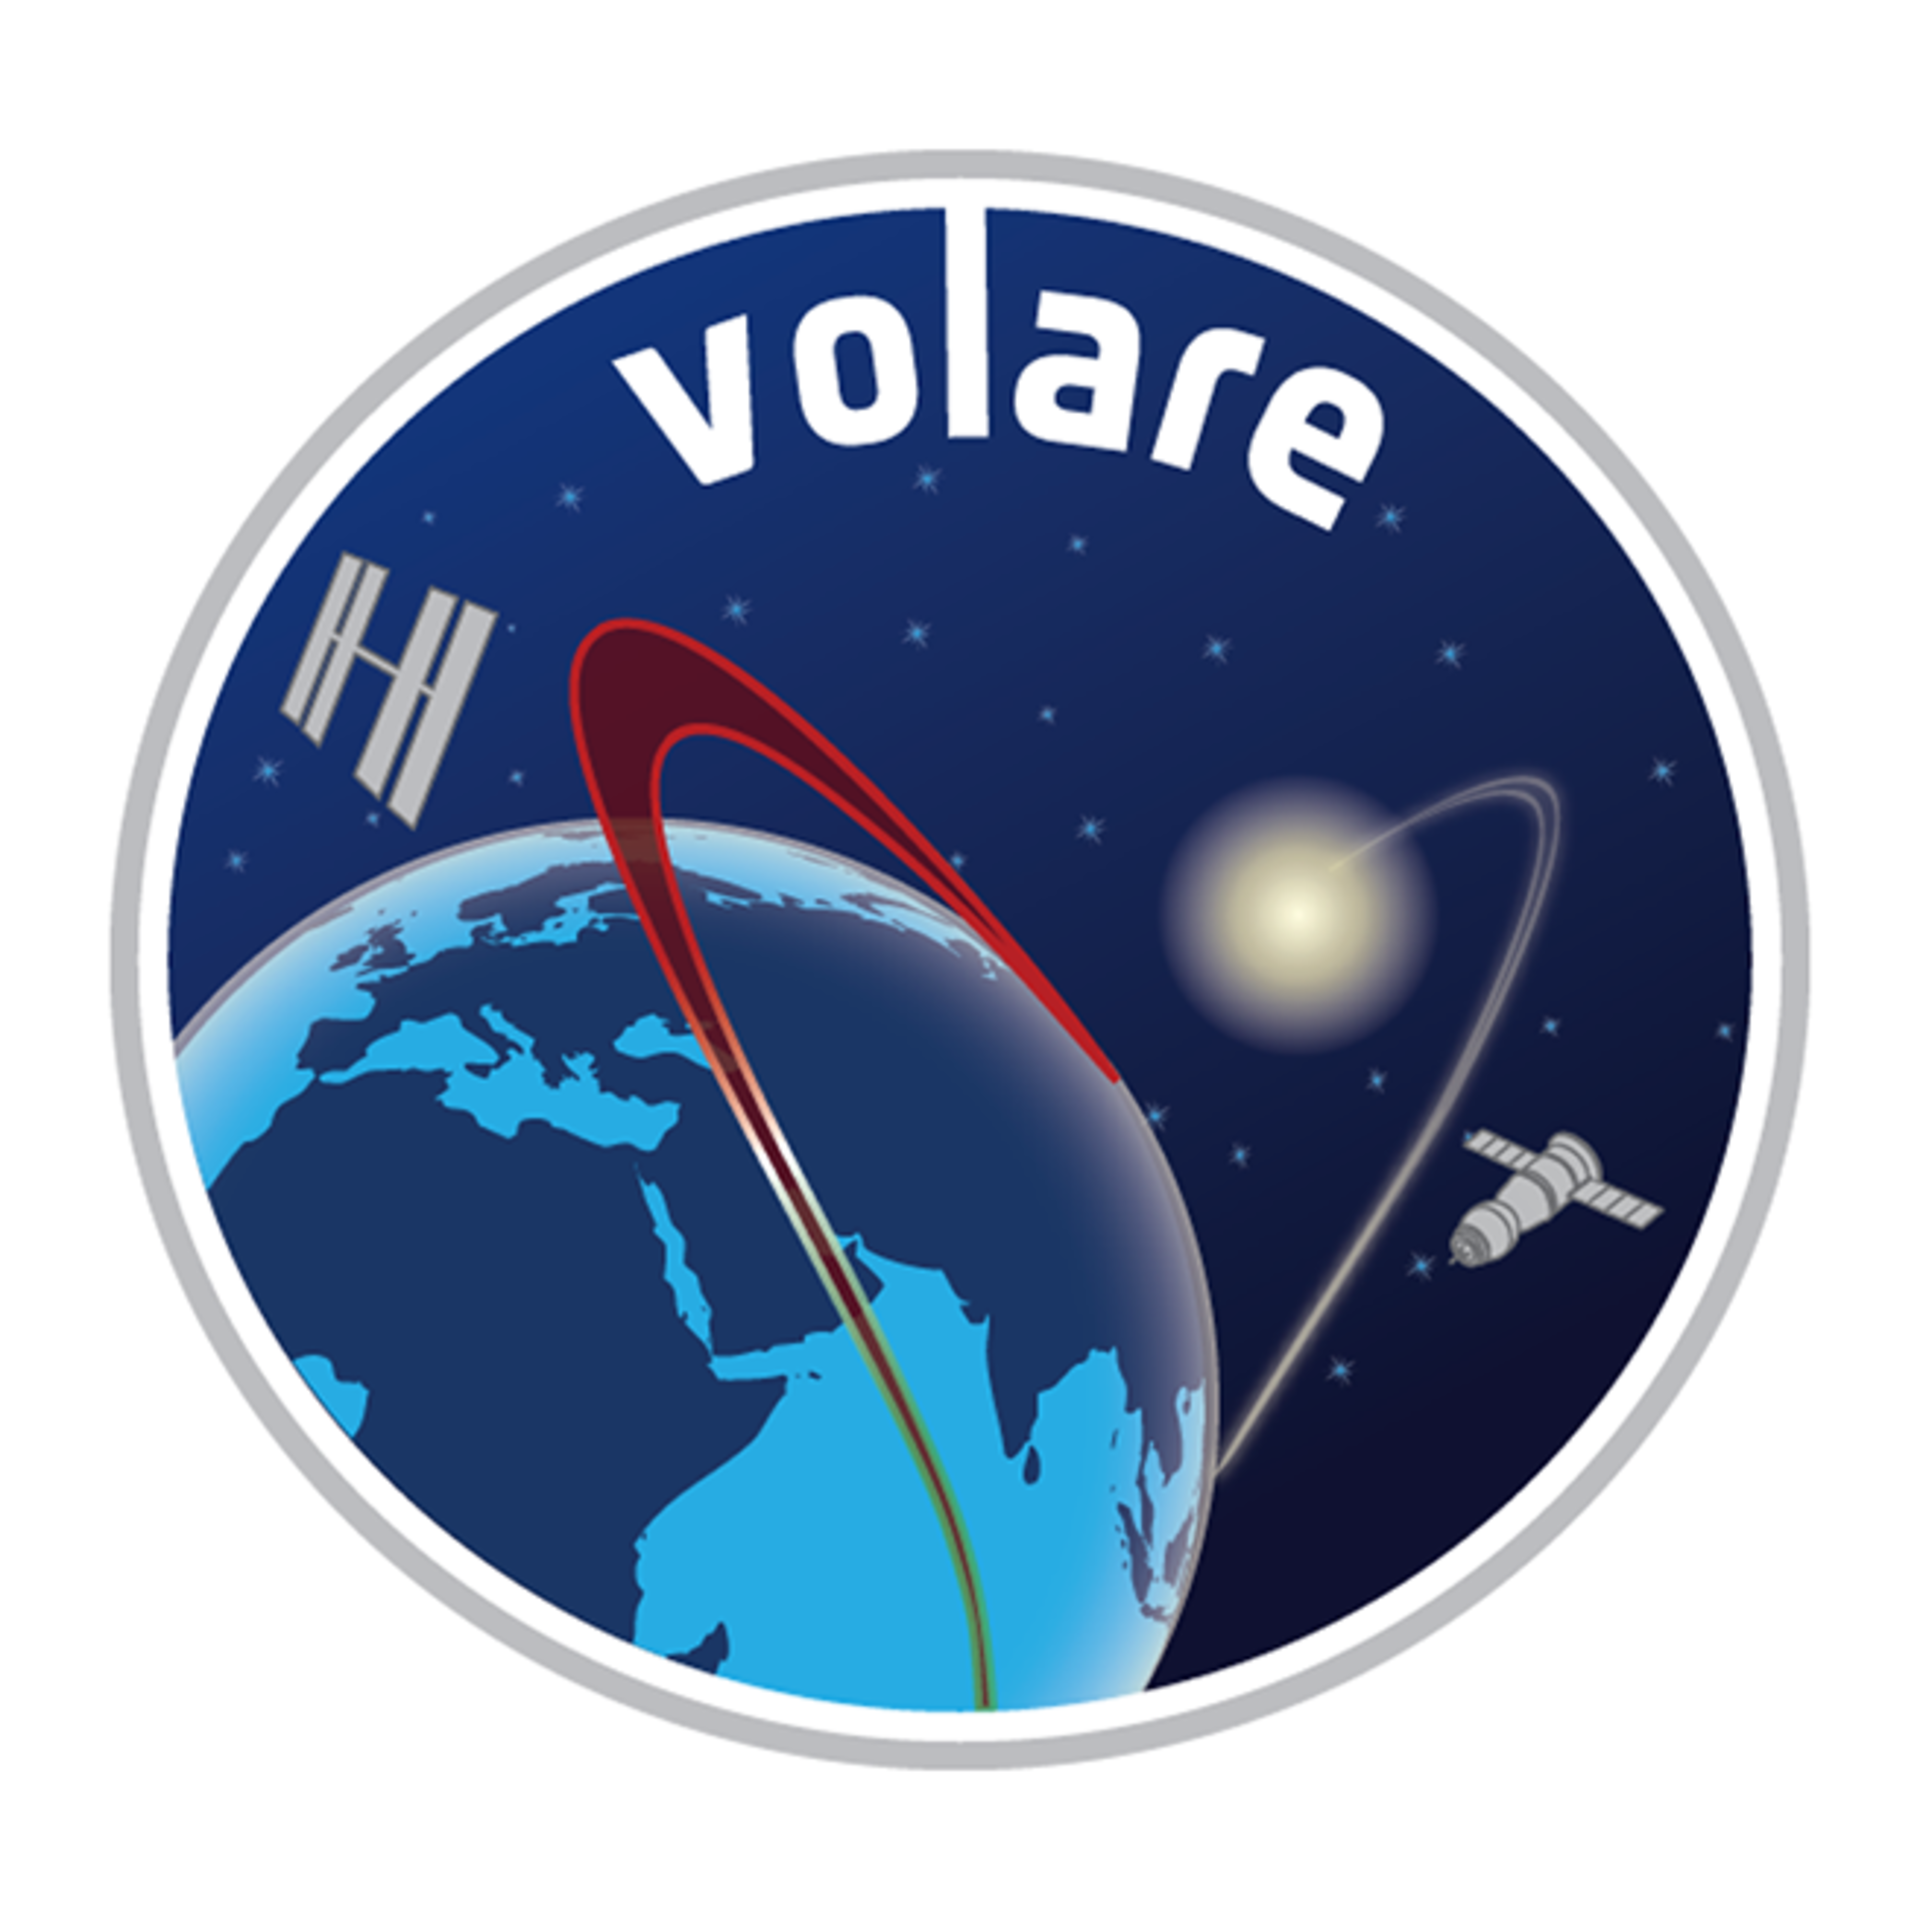 Volare patch